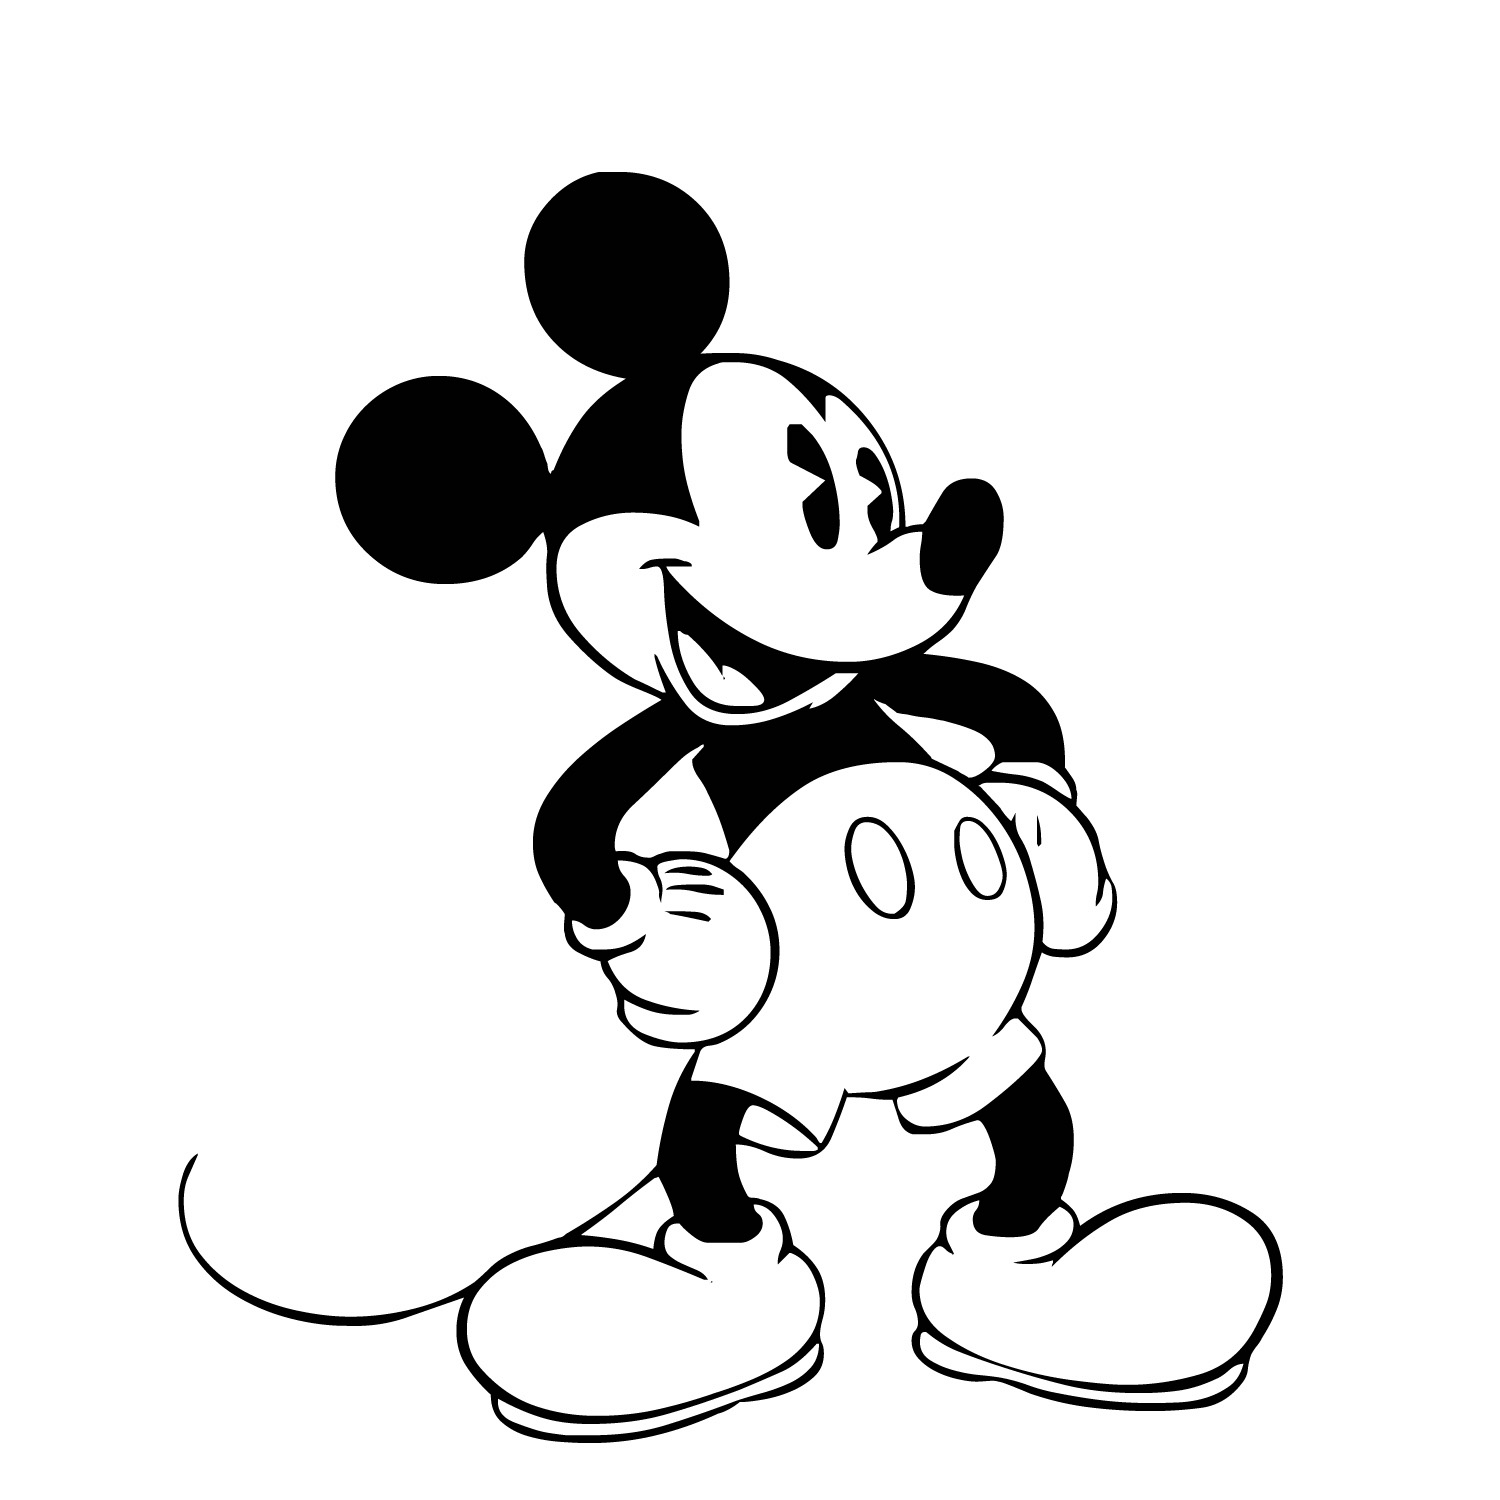 Mickey_Mouse--Black_and_white